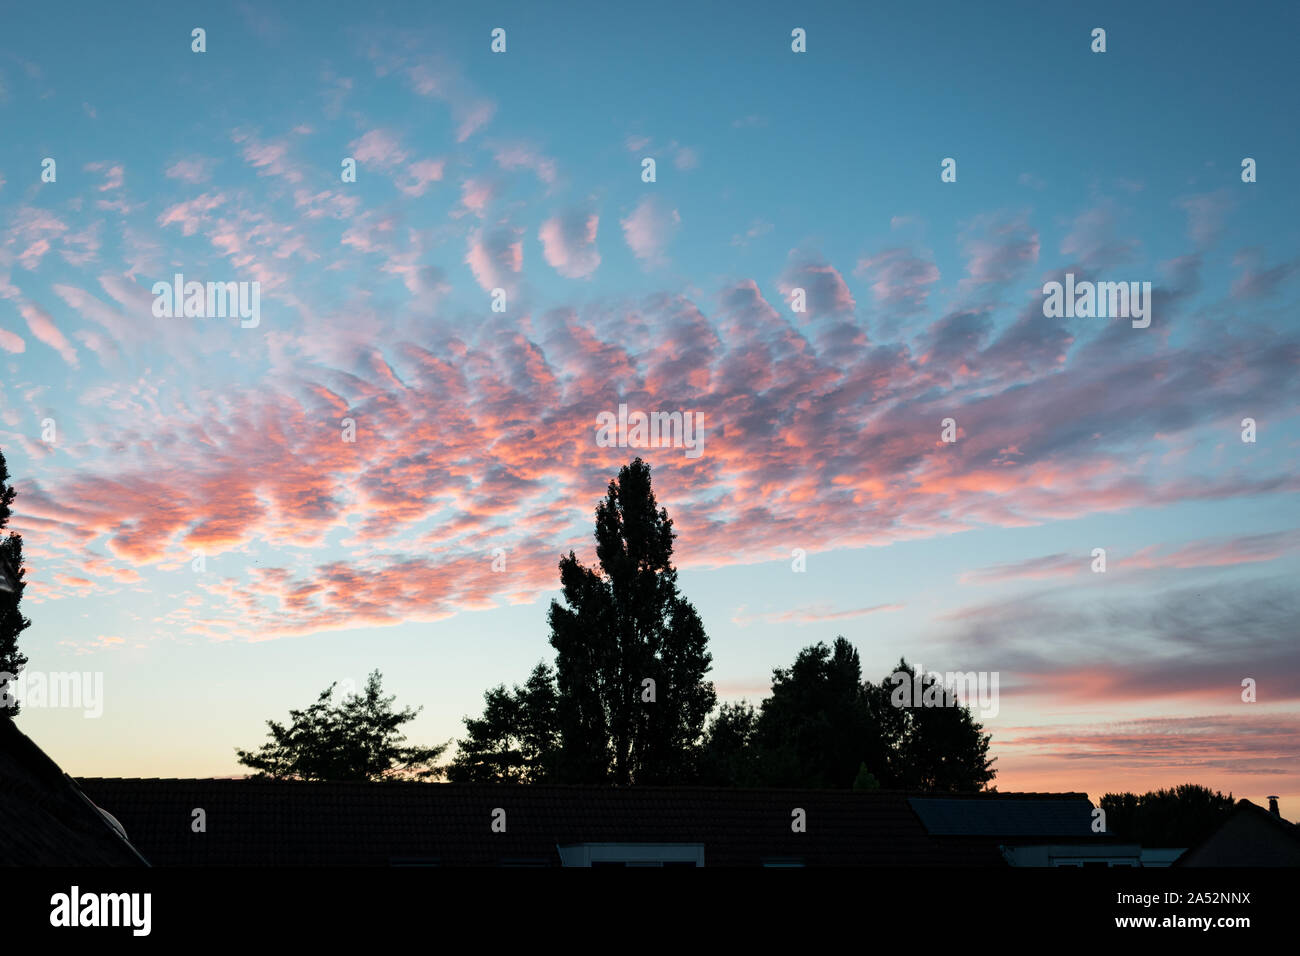 Salmon red colored altocumulus clouds at sunset. Trees are silhouetted against the evening sky. Stock Photo